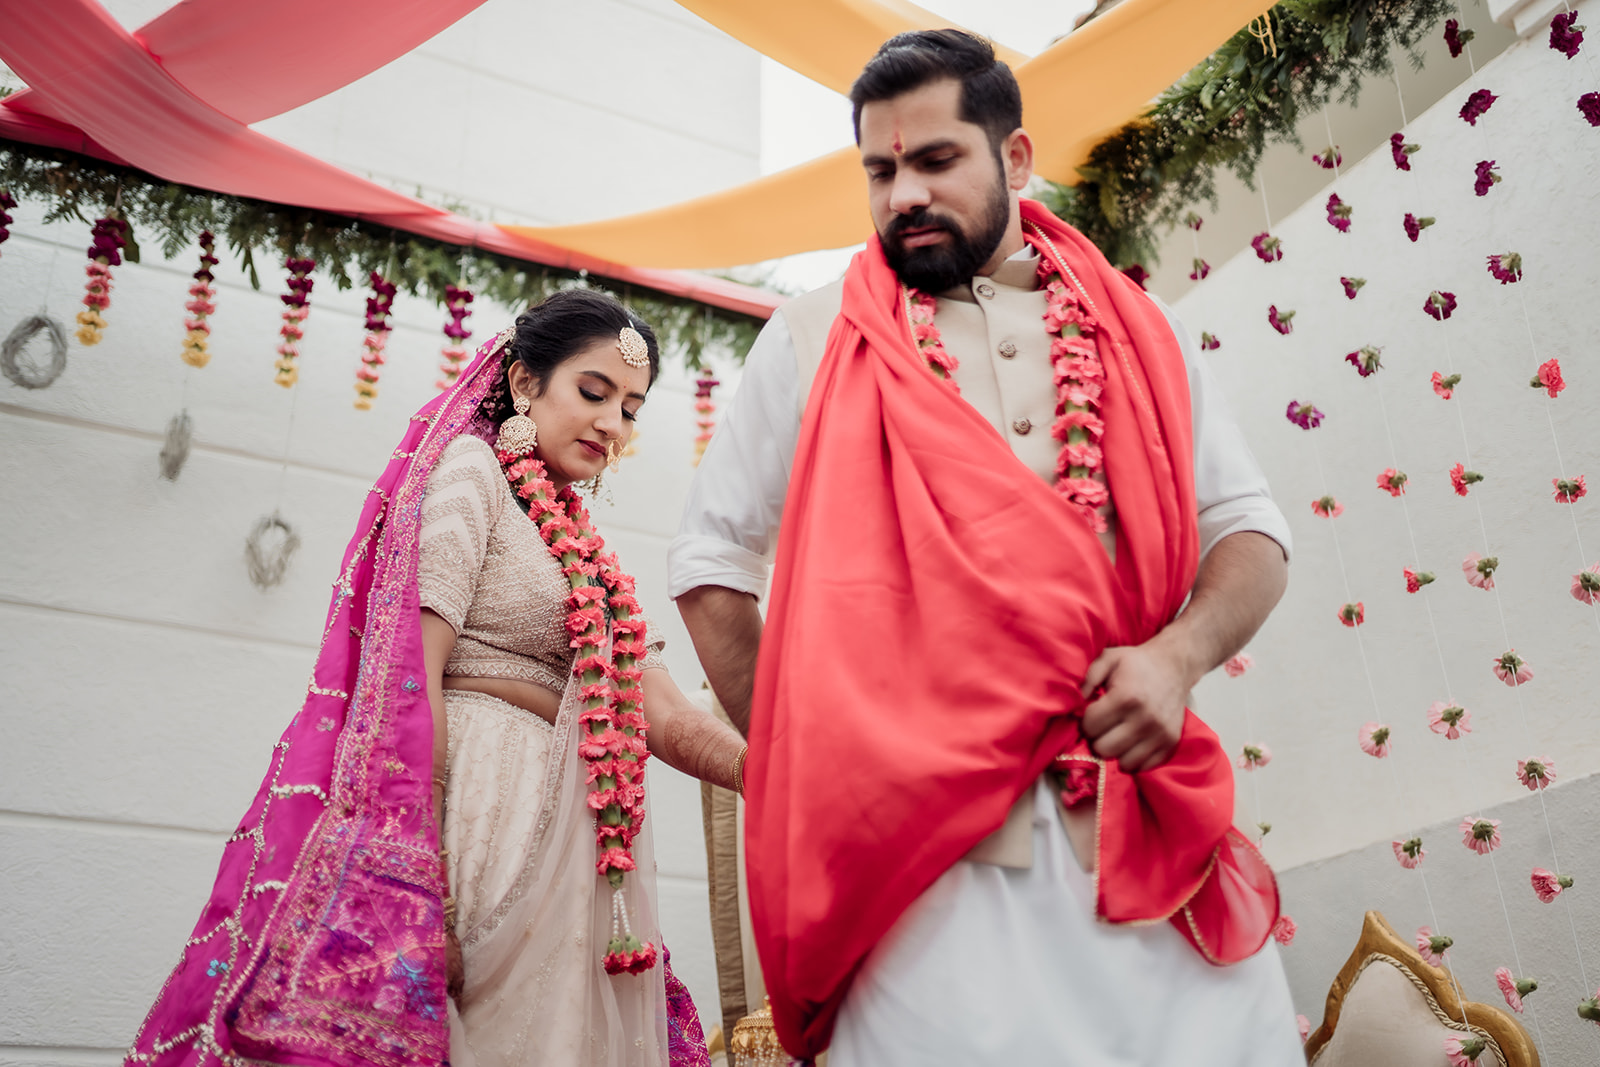 Pious commitment: The bride and groom partake in the pheras ceremony, expressing their devotion and love for each other